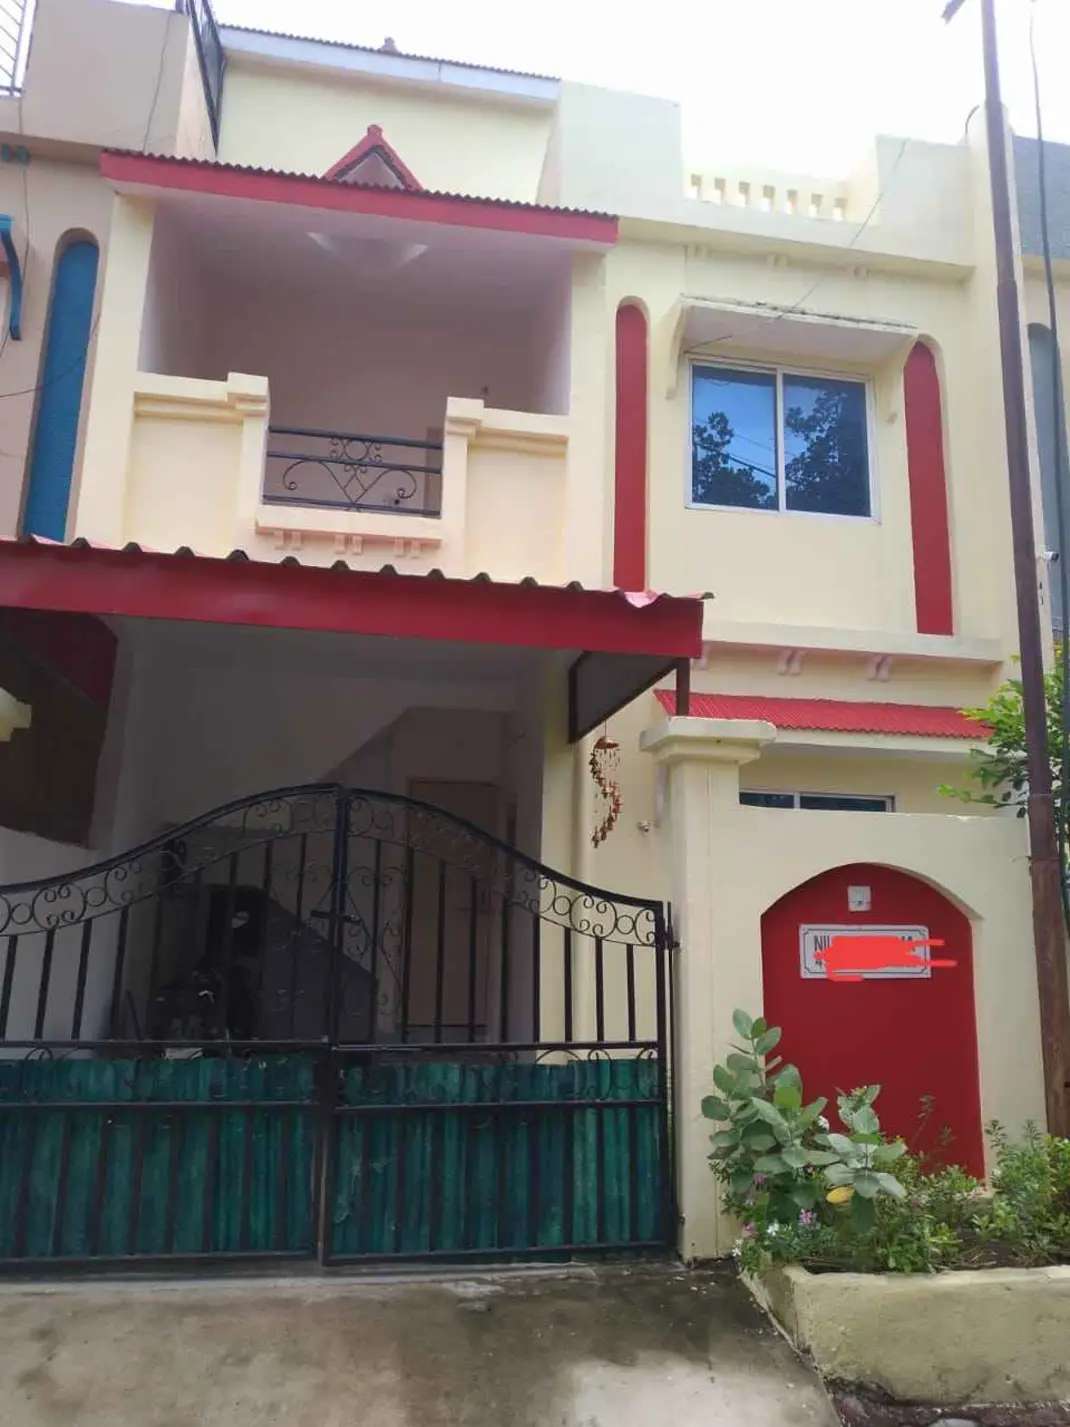 3 Bed/ 3 Bath Sell House/ Bungalow/ Villa; 800 sq. ft. lot for sale @Shree Ram colony ayodhya bypass road bhopal